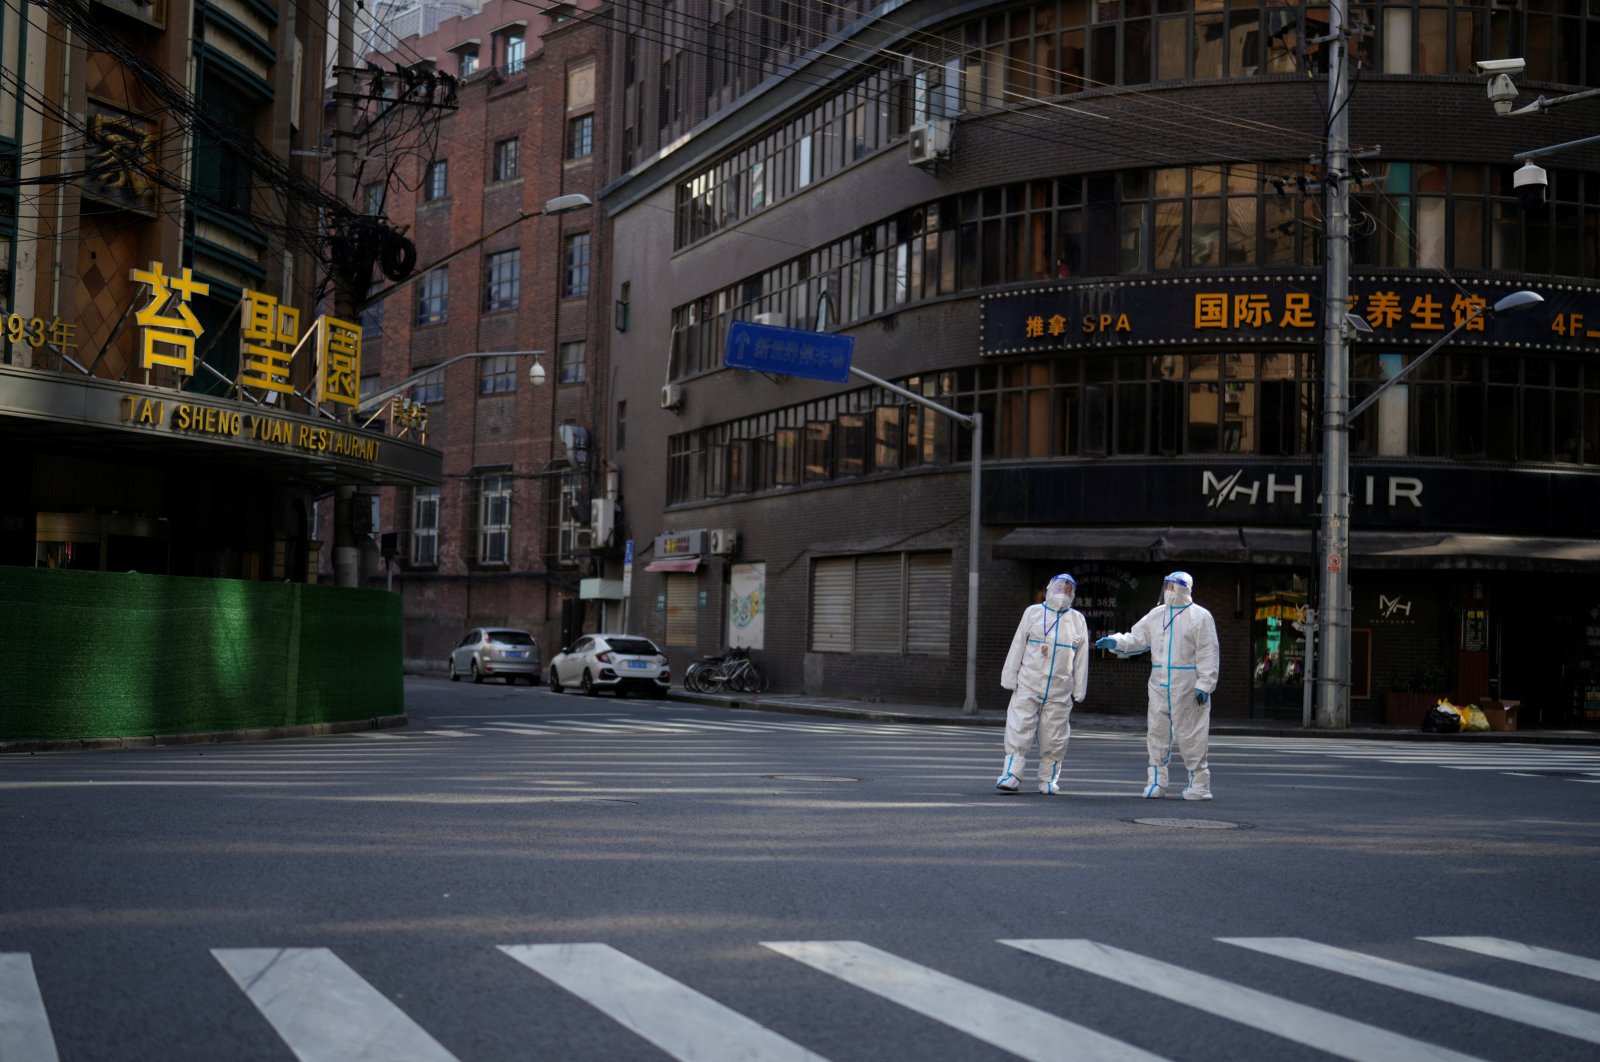 Workers in protective suits stand on a street during a lockdown, amid the COVID-19 pandemic, Shanghai, China, April 16, 2022. (Reuters Photo)